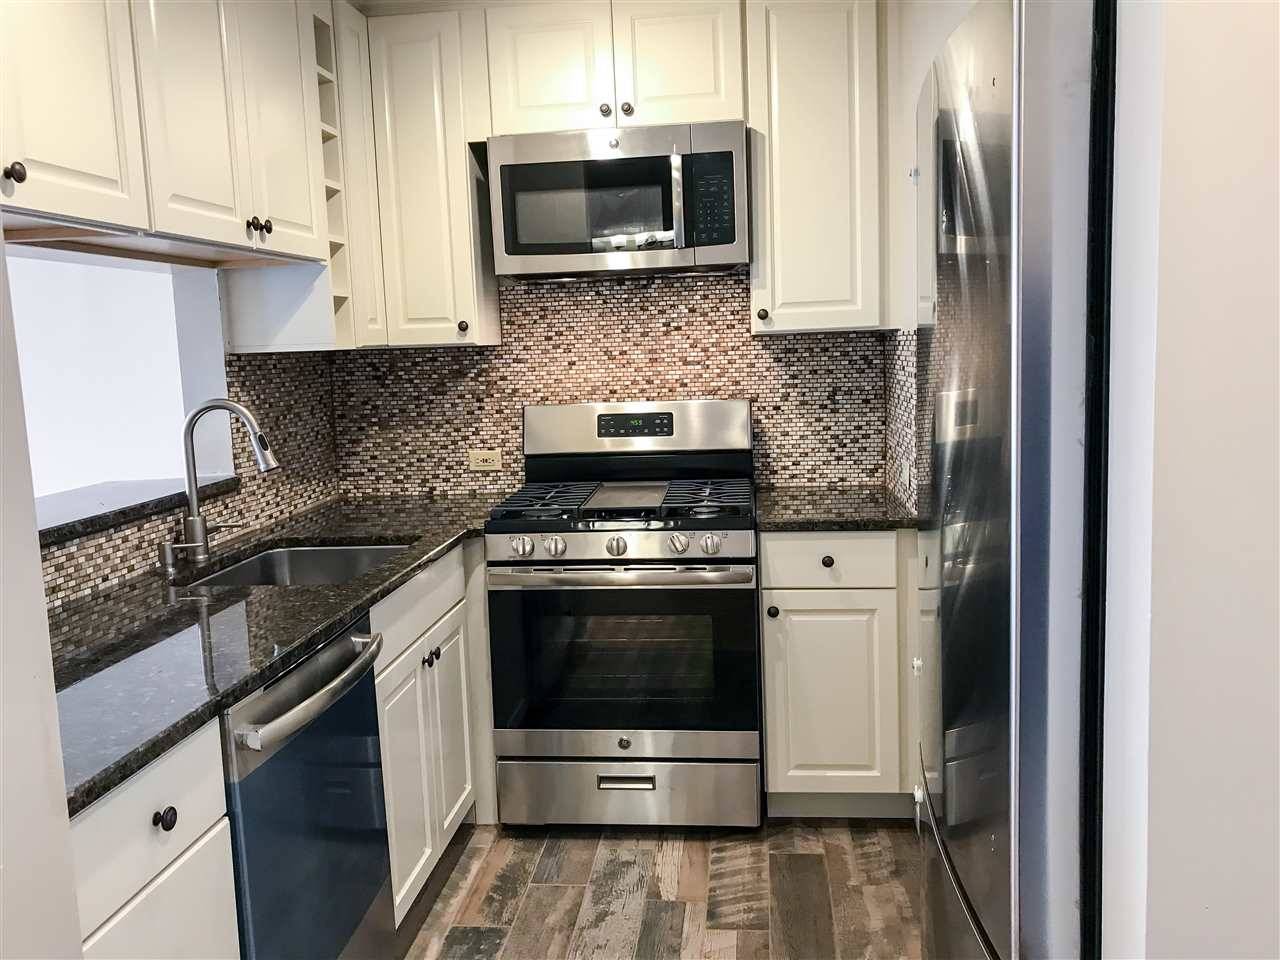 1/2 FEE PAID BY LANDLORD - 1 BR Hoboken New Jersey